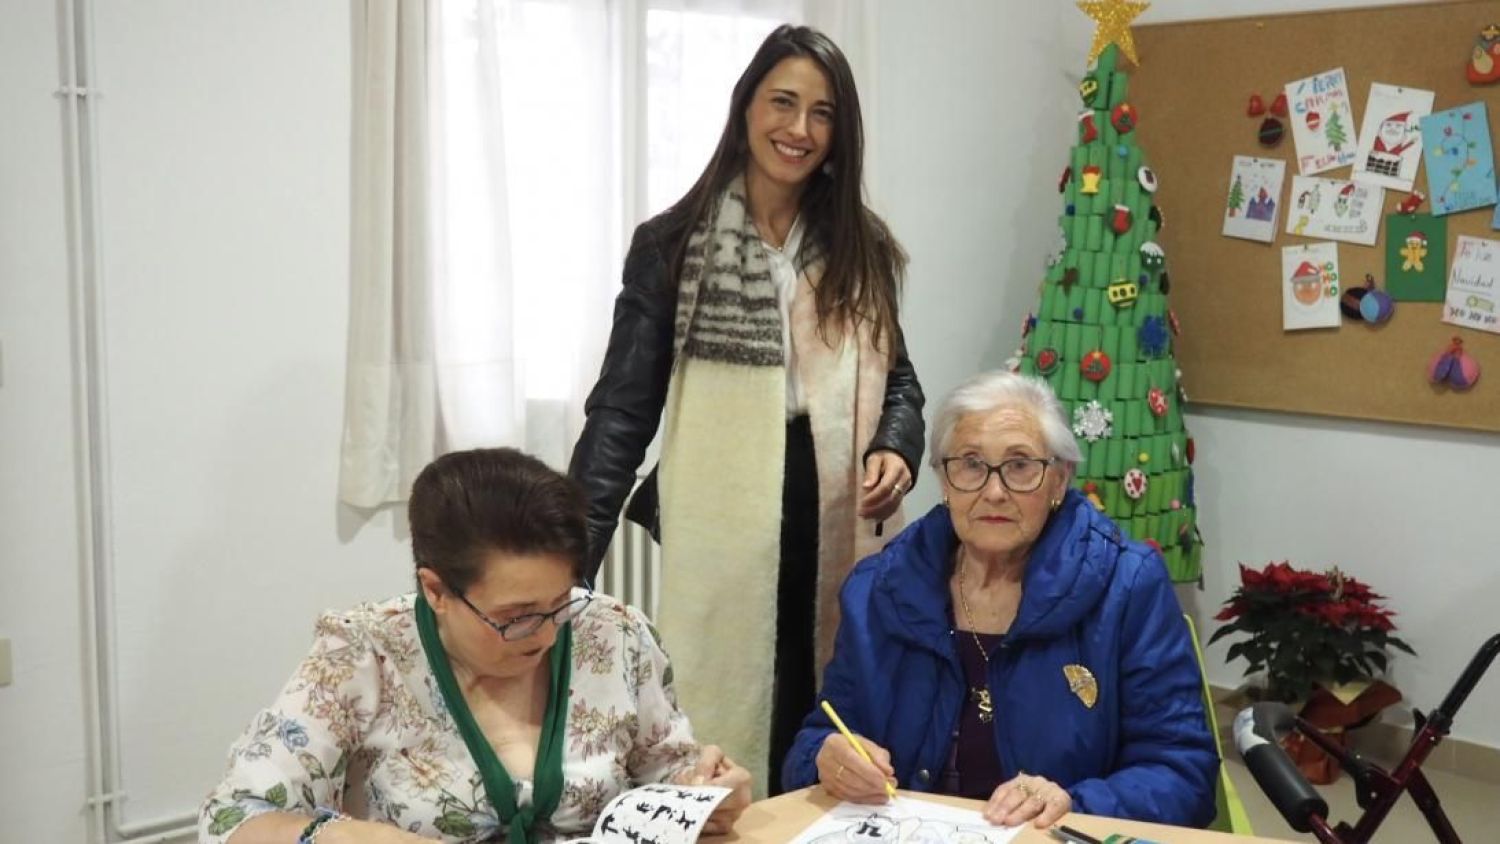 The social welfare organization is developing the “Christmas in Company” programme.  “No Mayor is Alone” with 180 participants (Castilla La Mancha, community)